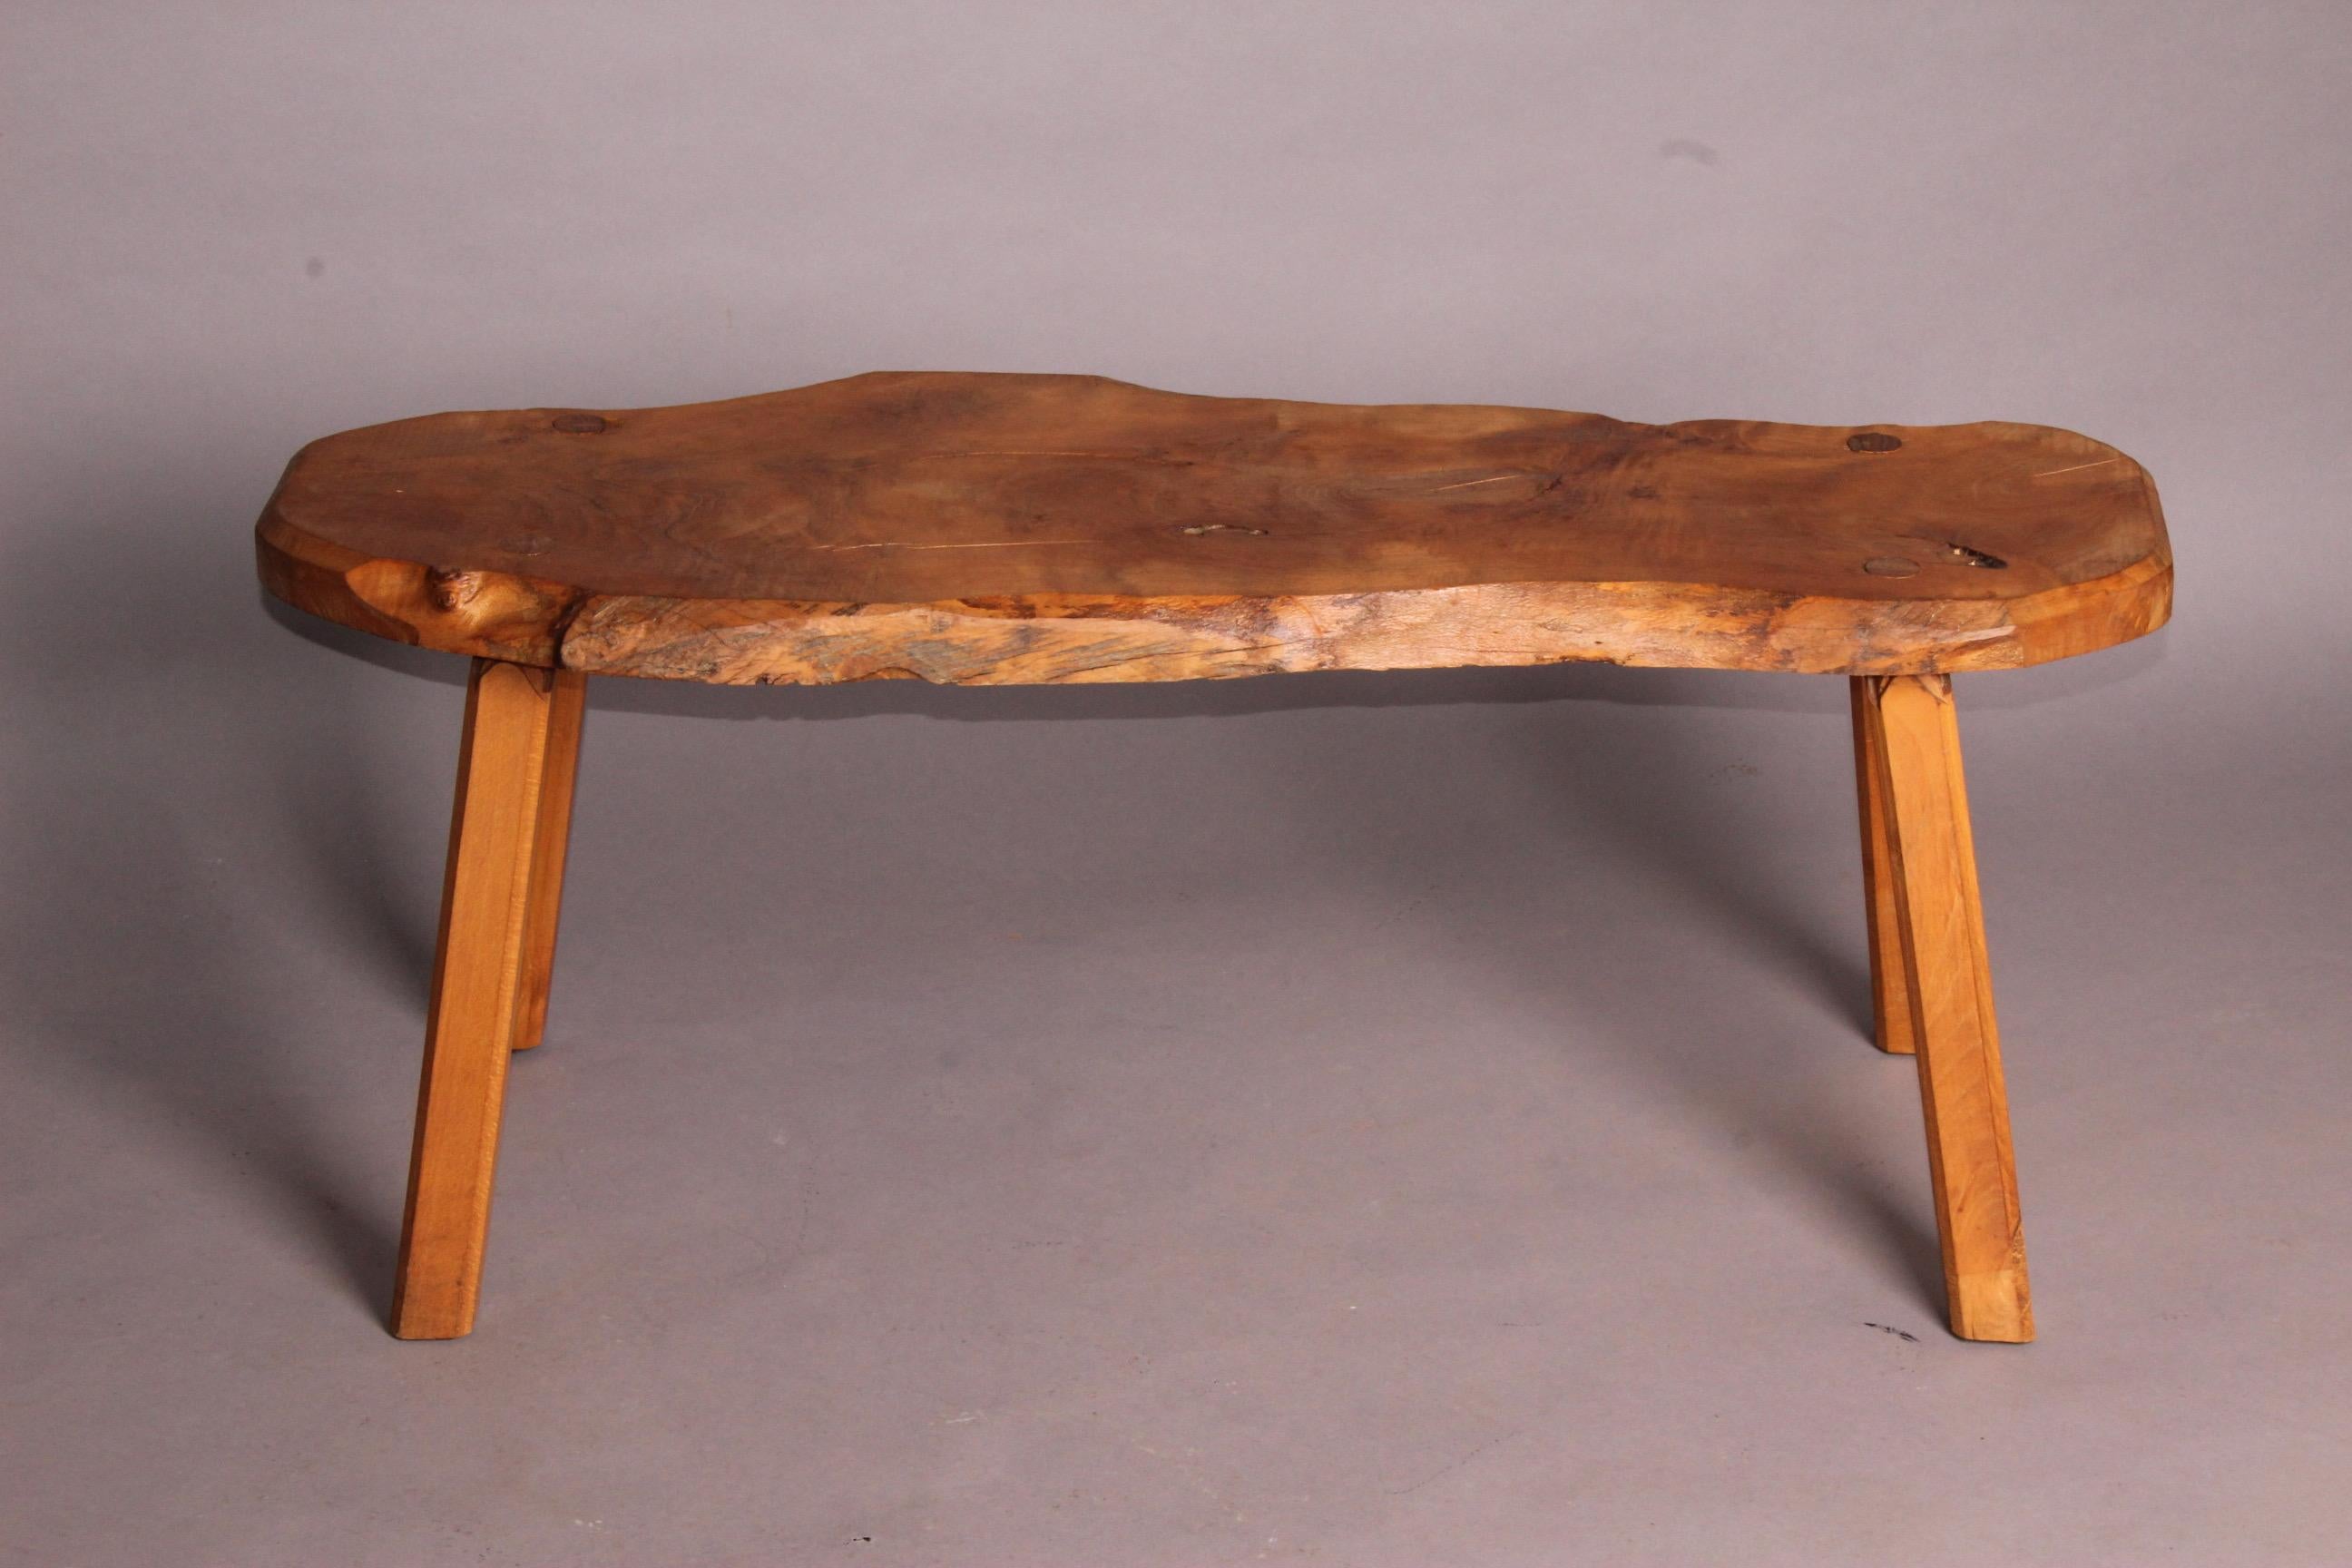 Wood bench or low table in the style of Ateliers Marolles.